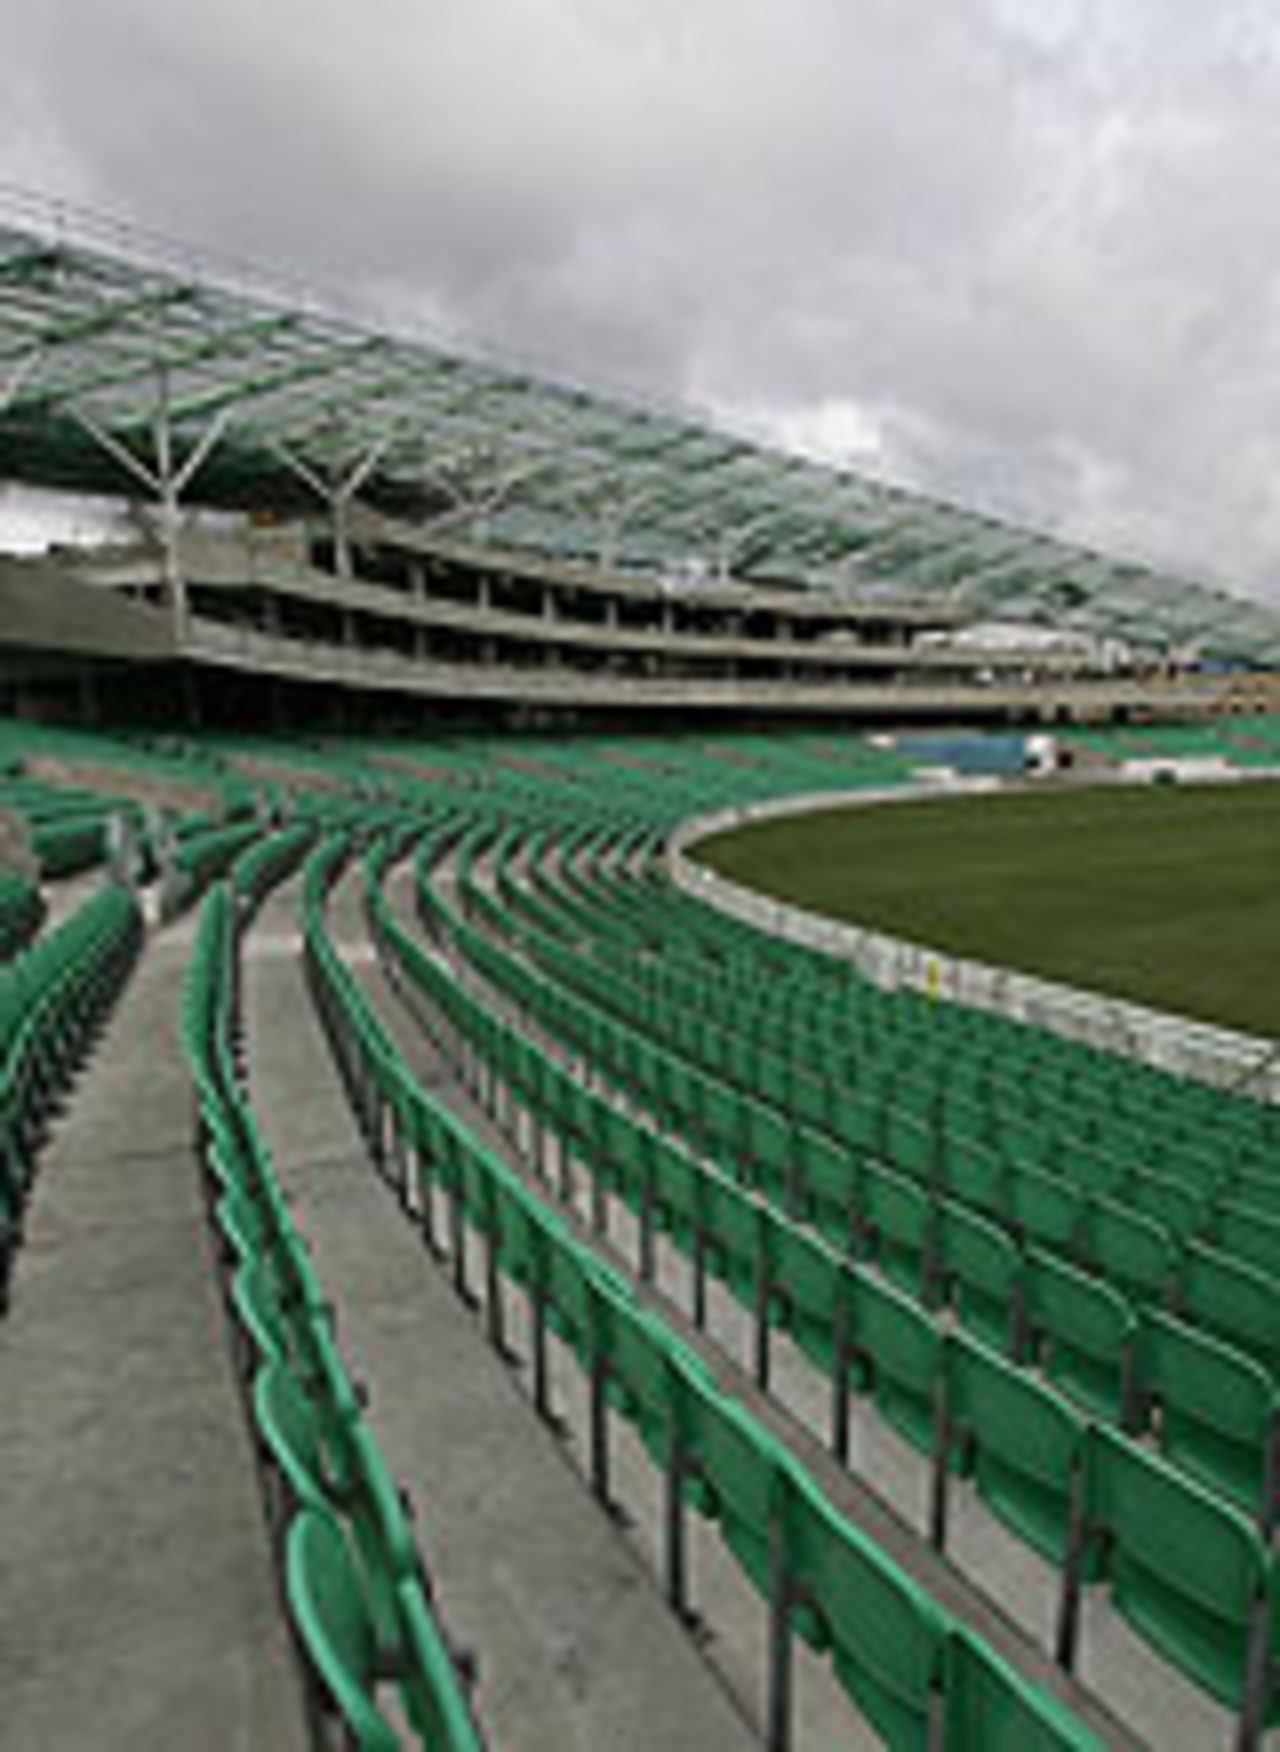 The new-look Vauxhall End at The Oval, 2005